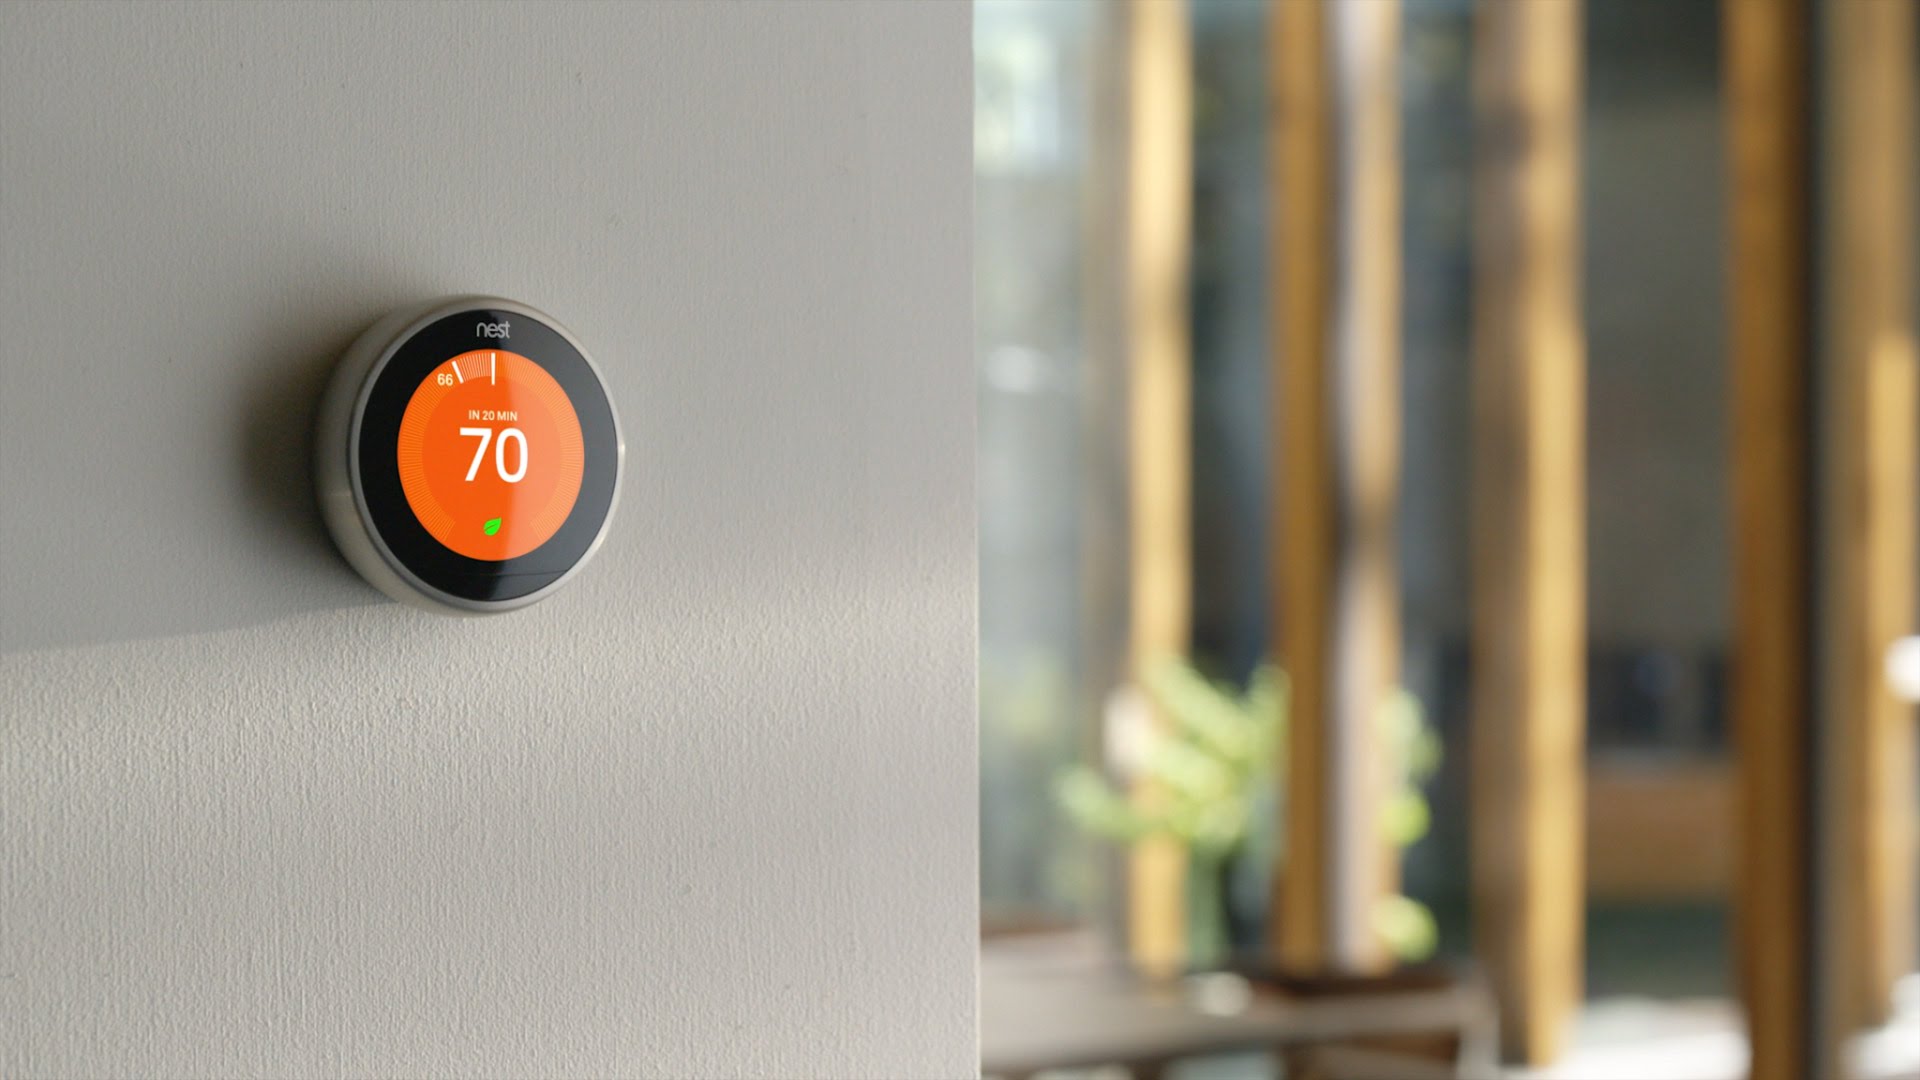 Nest is supposedly developing a brand new security system and more affordable thermostat